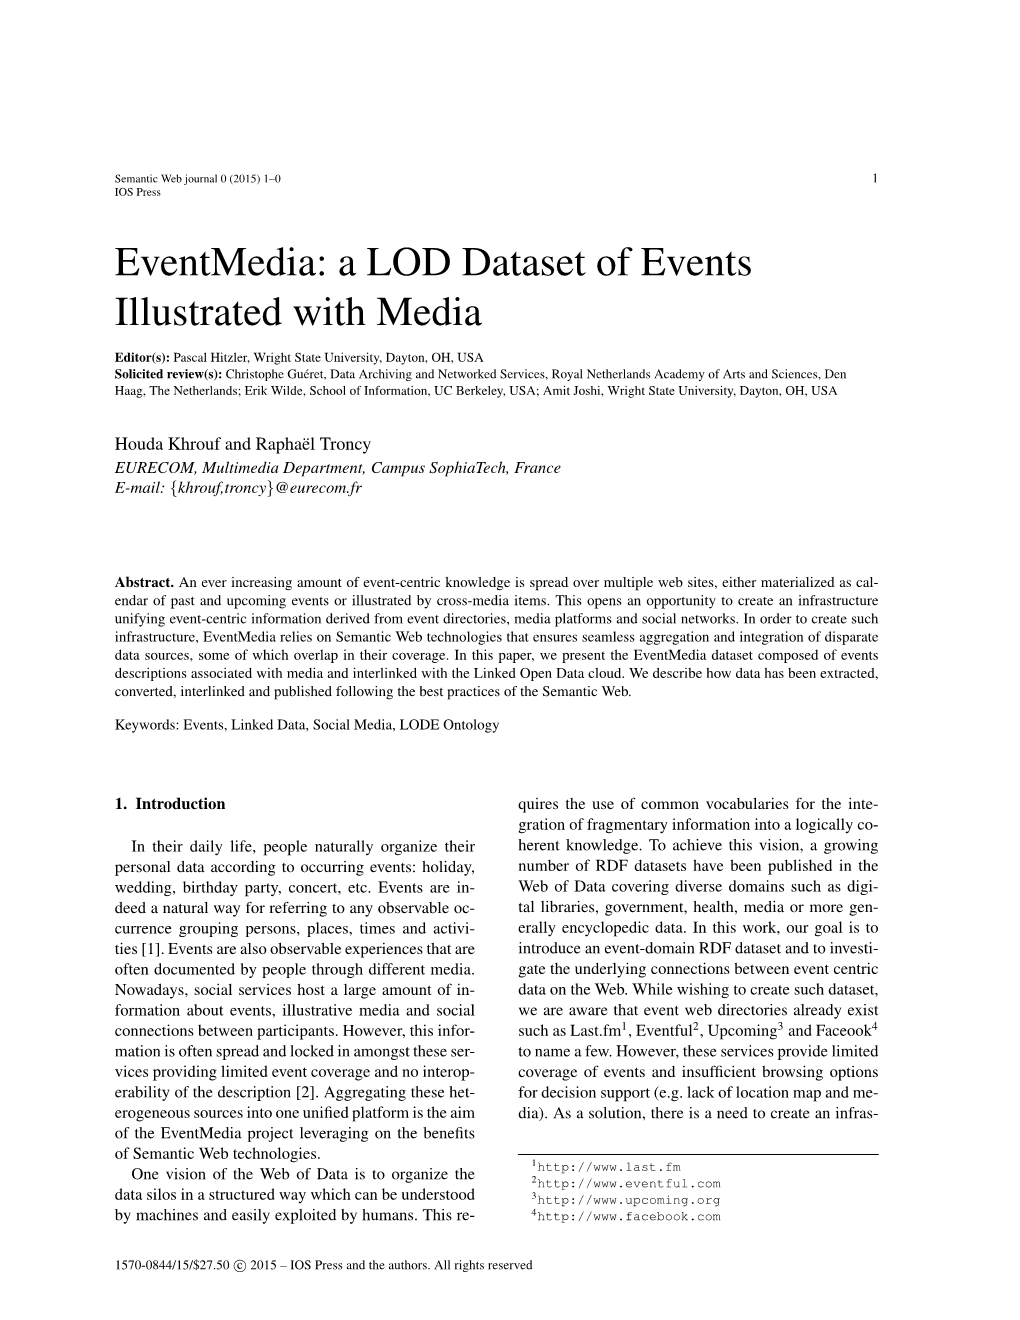 A LOD Dataset of Events Illustrated with Media